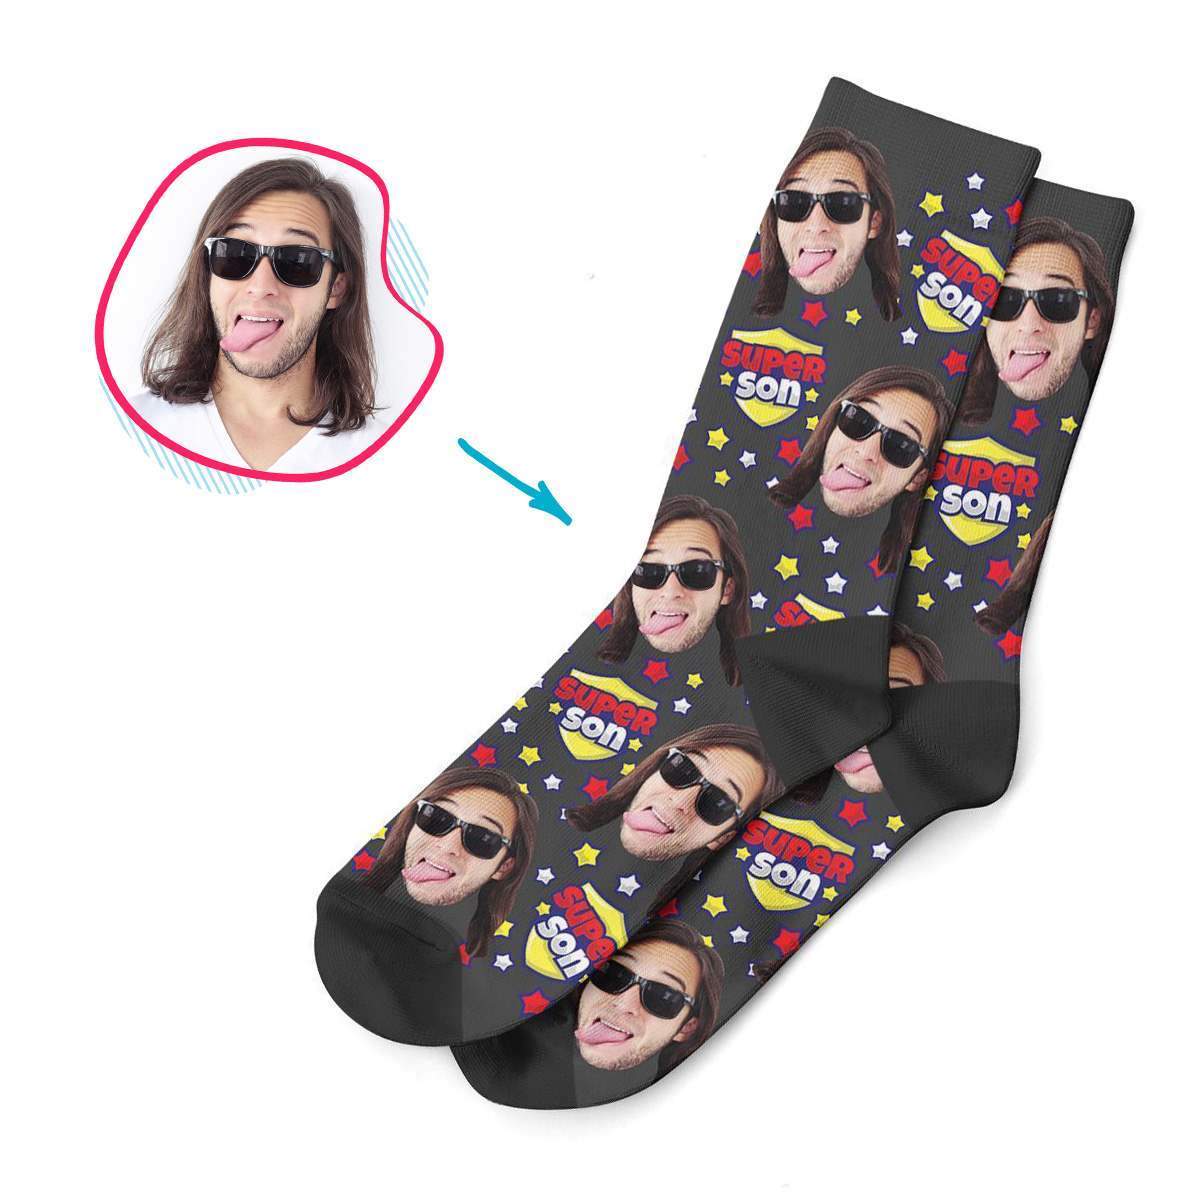 dark Super Son socks personalized with photo of face printed on them